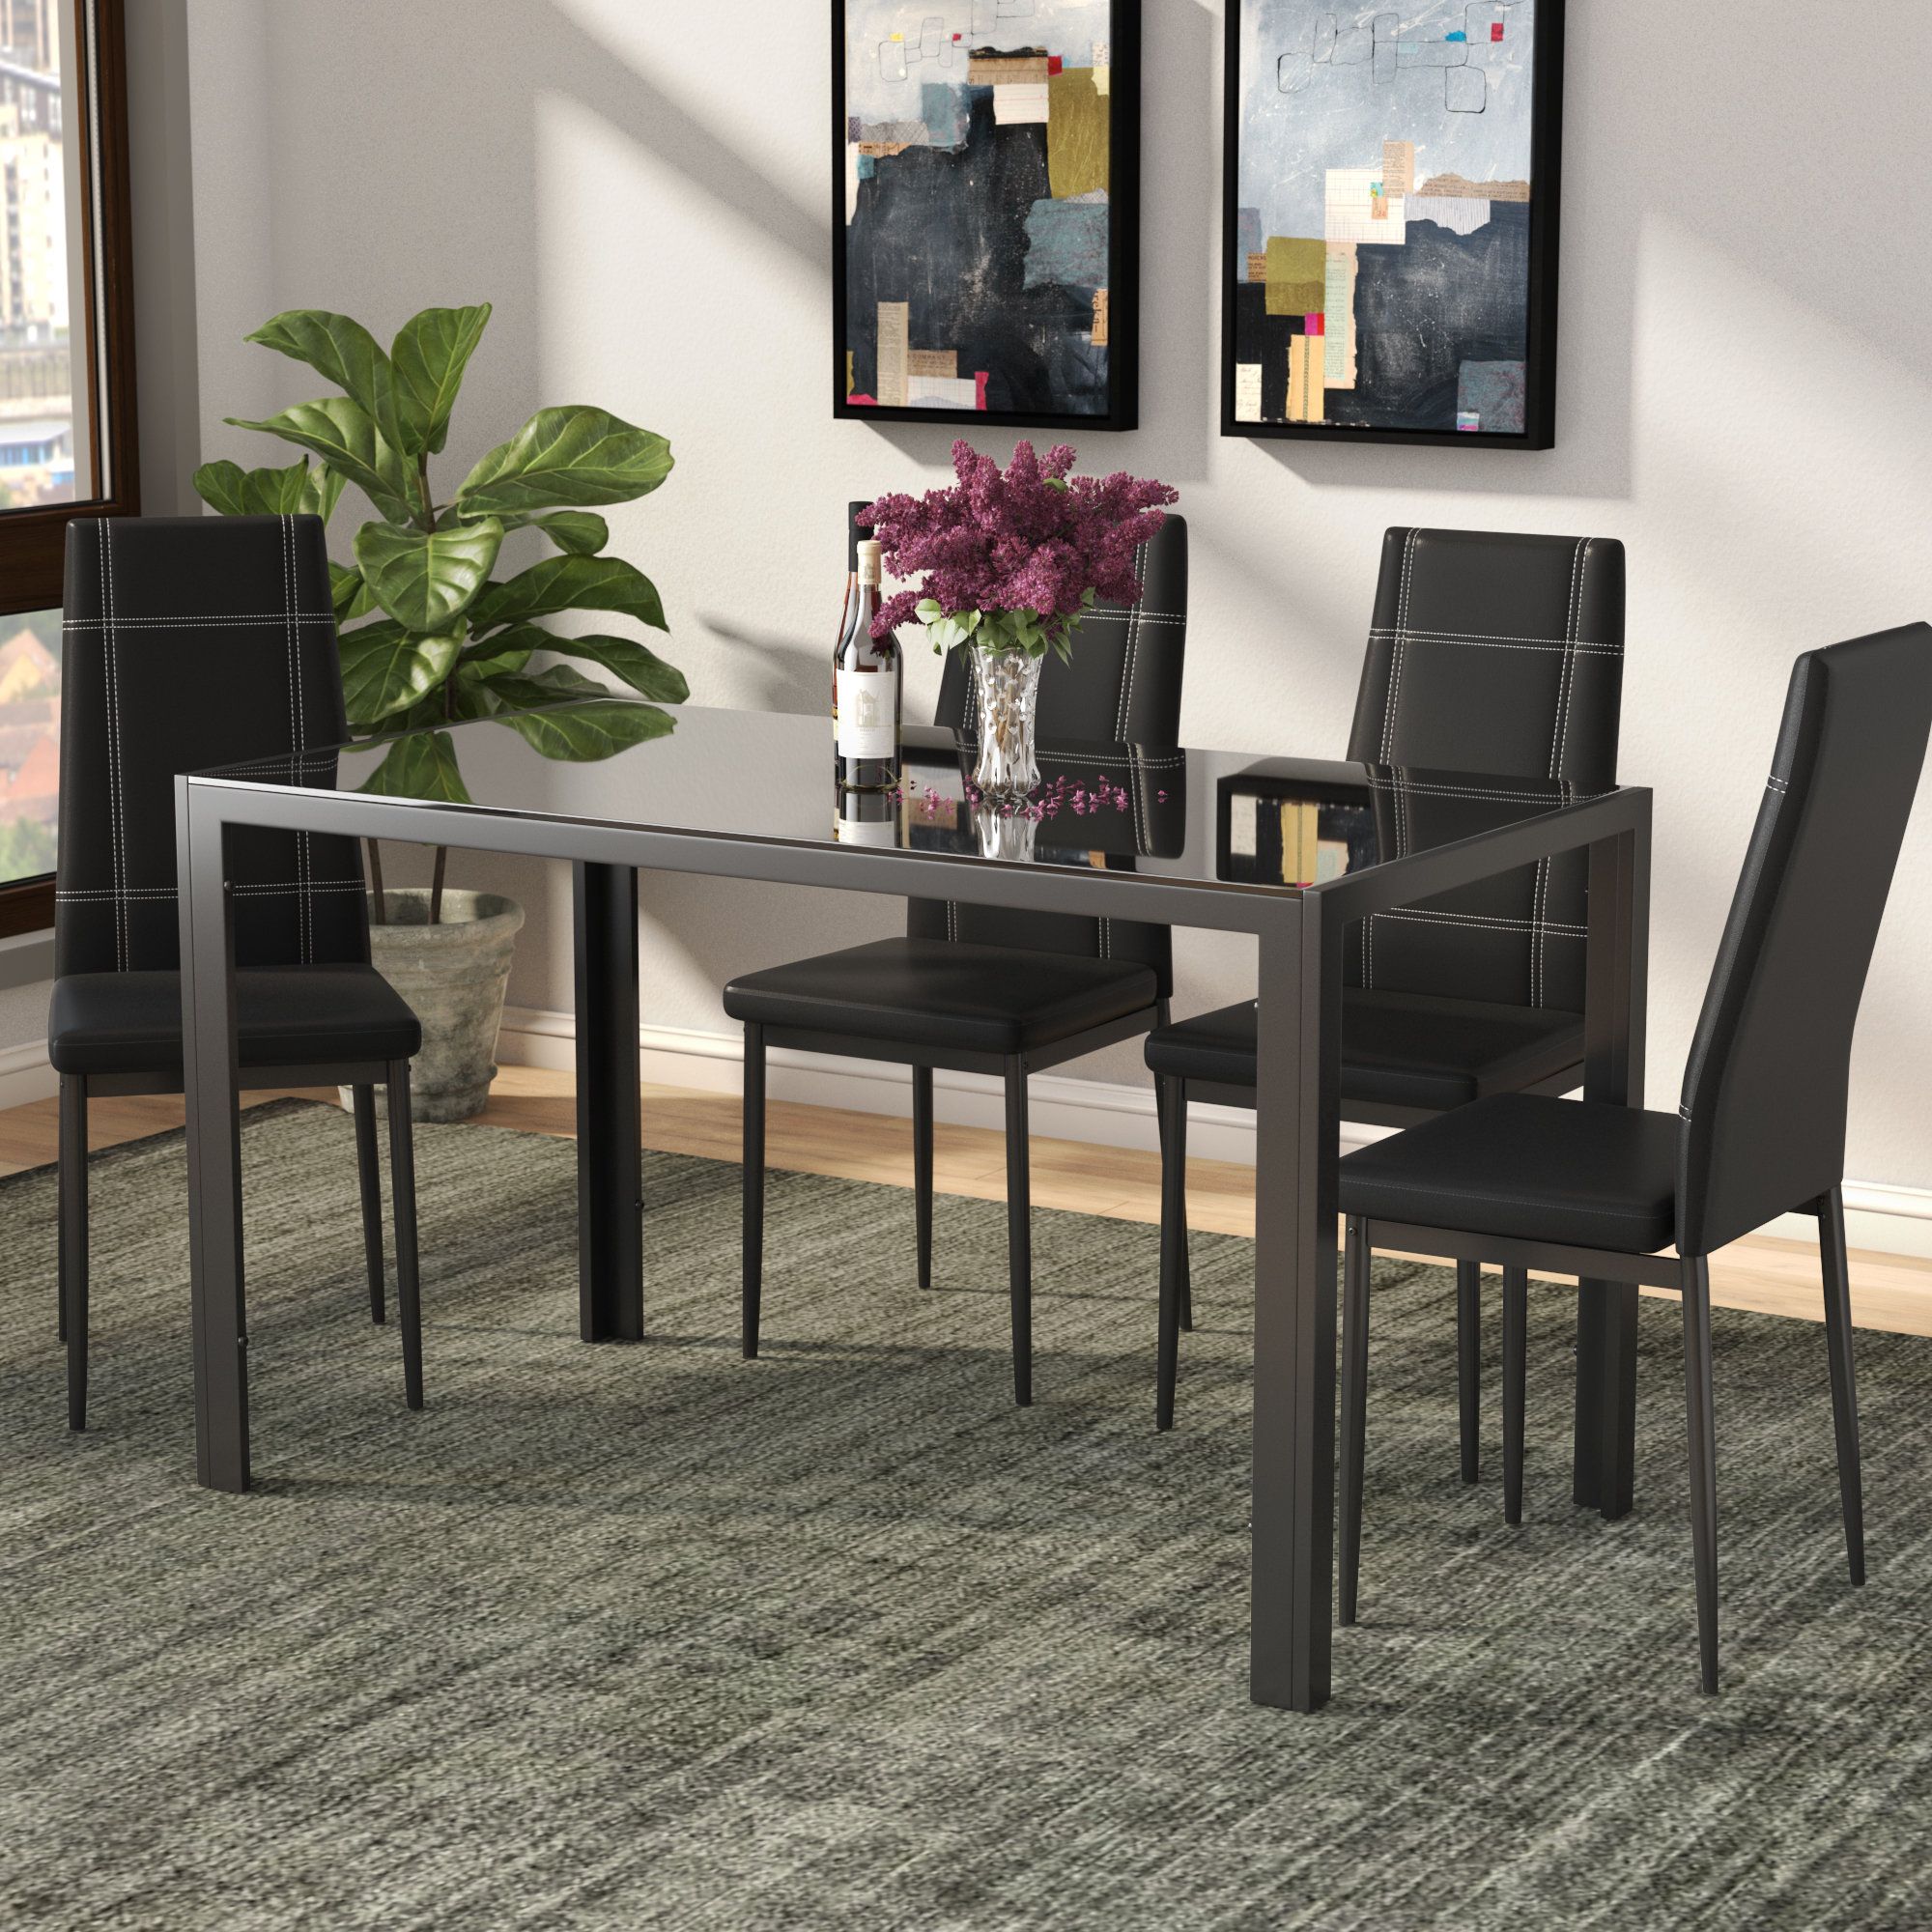 Most Current Baillie 3 Piece Dining Sets In Ebern Designs Maynard 5 Piece Dining Set & Reviews (View 17 of 20)